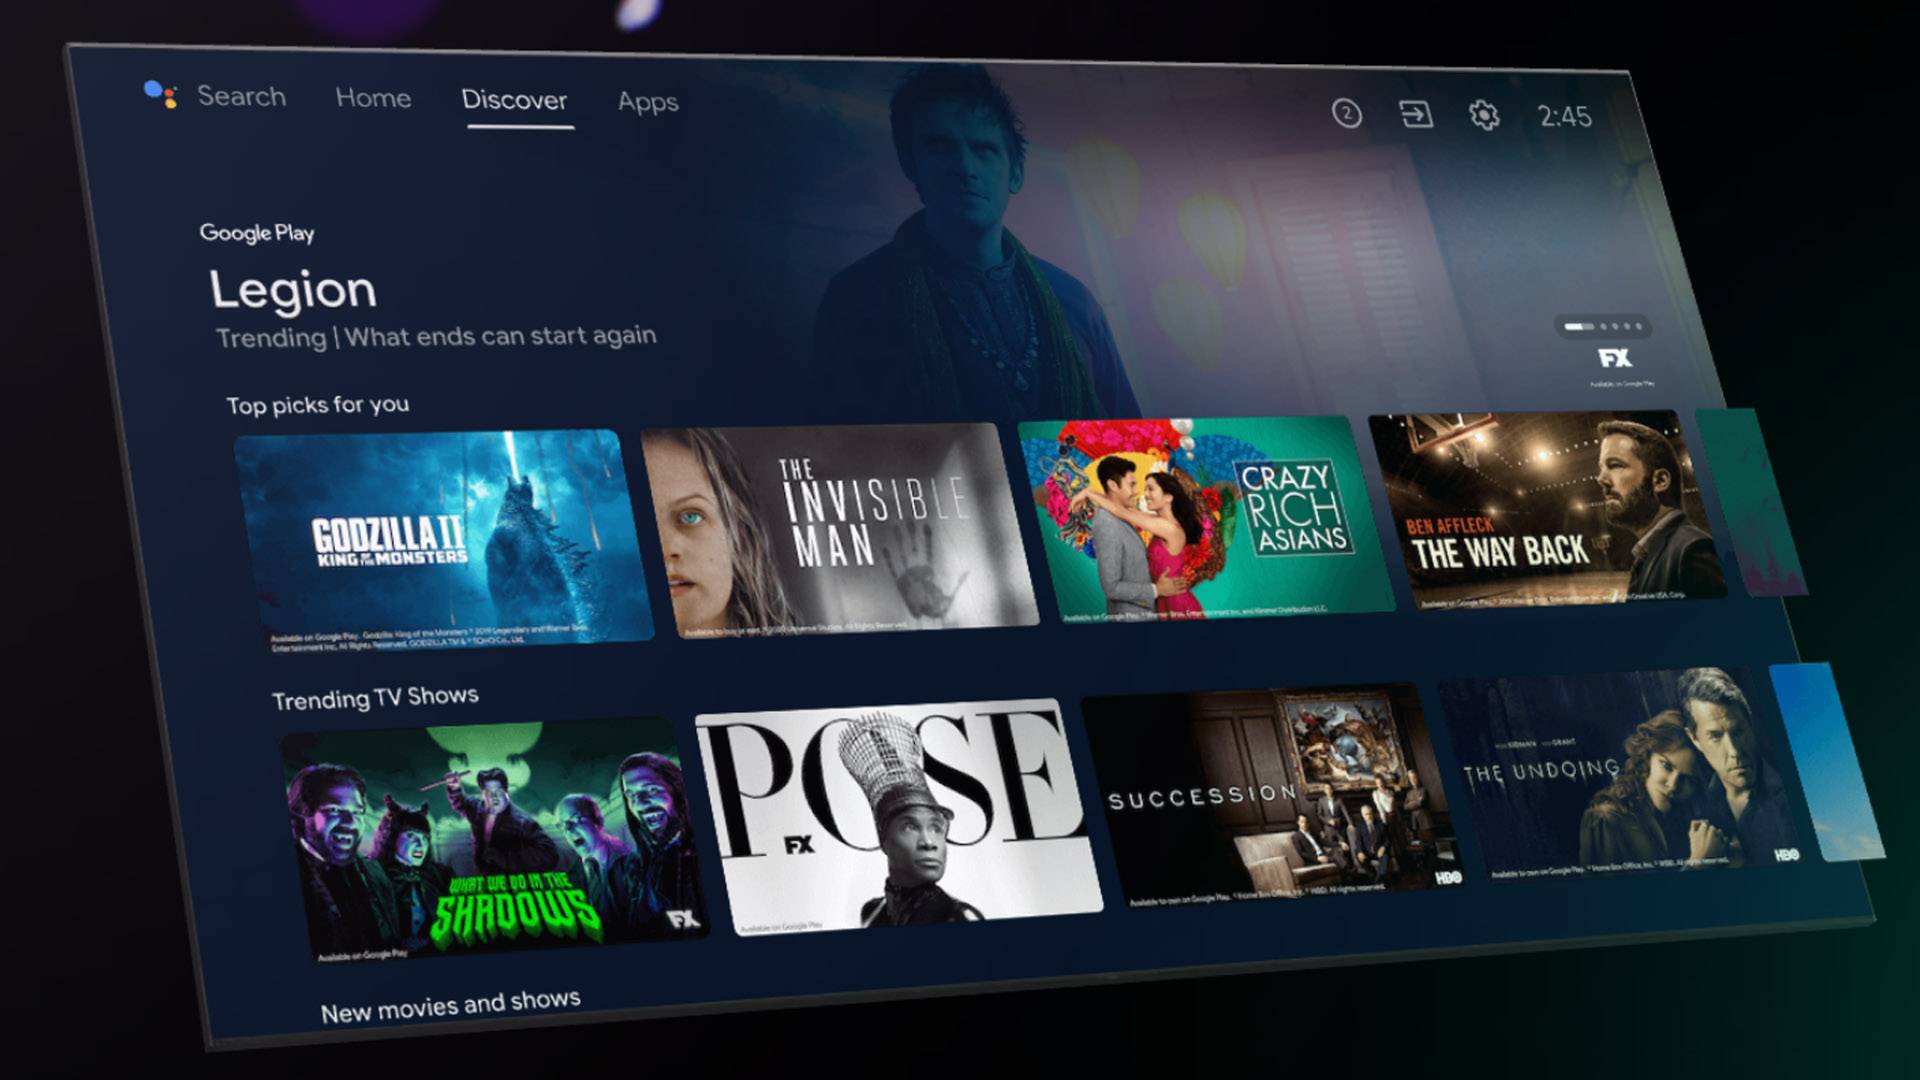 Android TV 12 is out now, complete with 4K UI support and blurred backgrounds